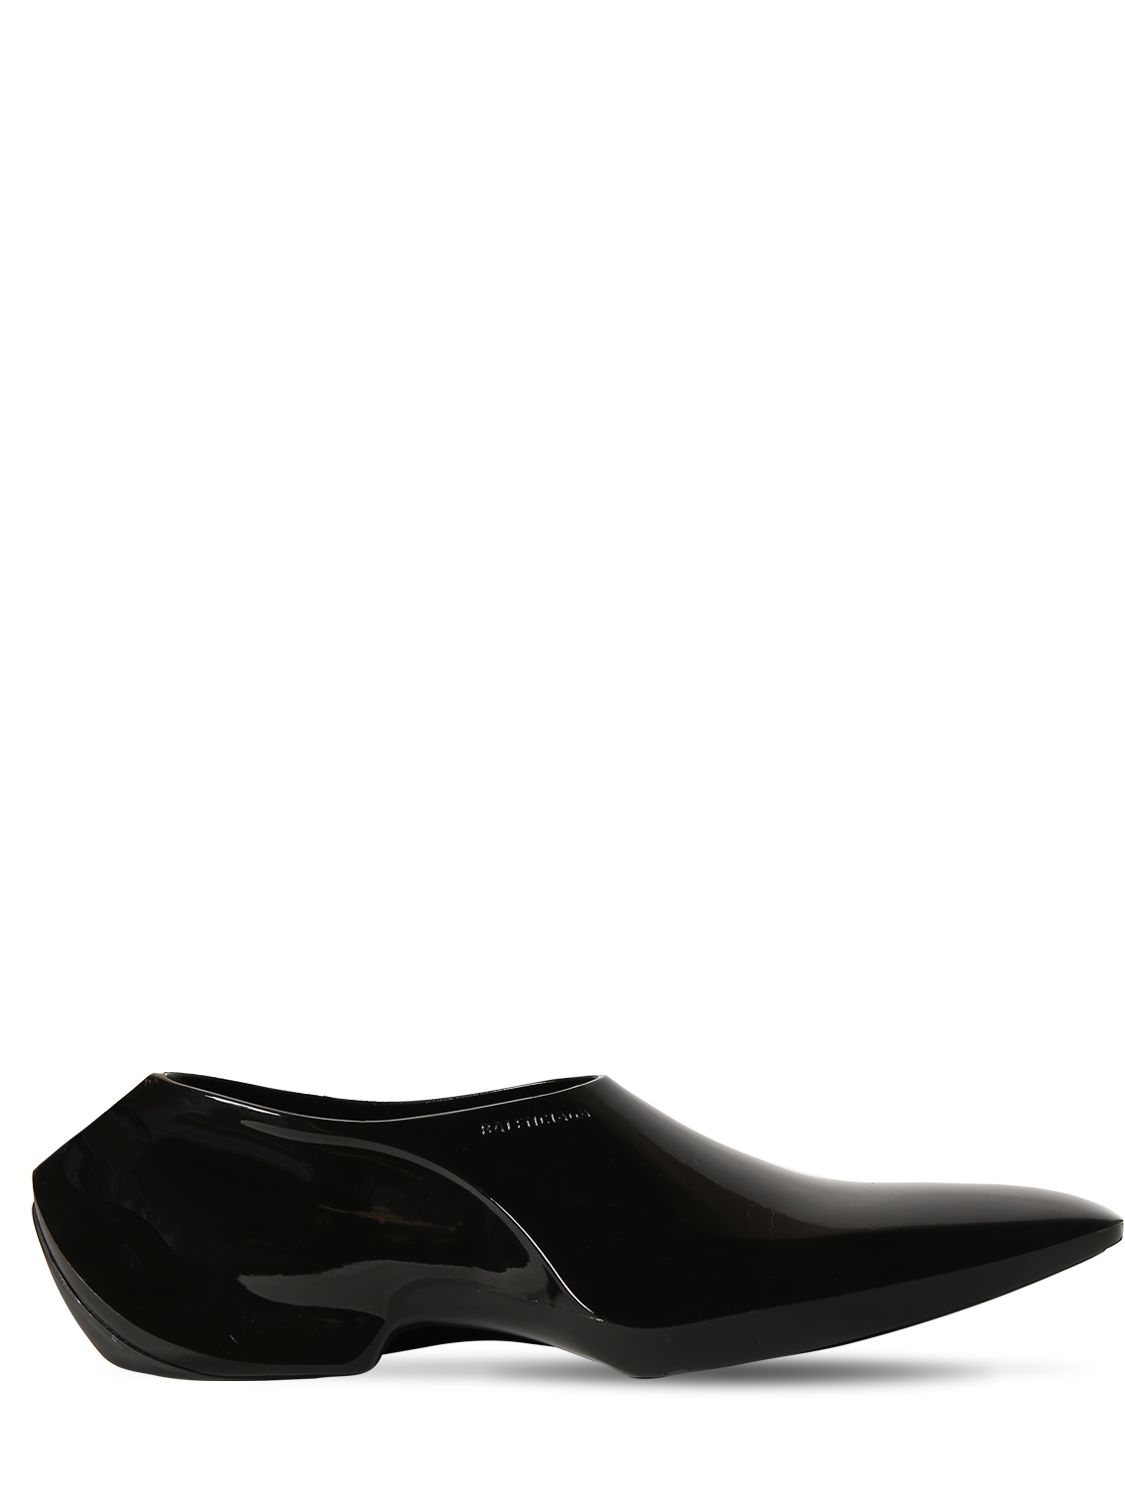 Space Shoe Faux Patent Leather Loafers